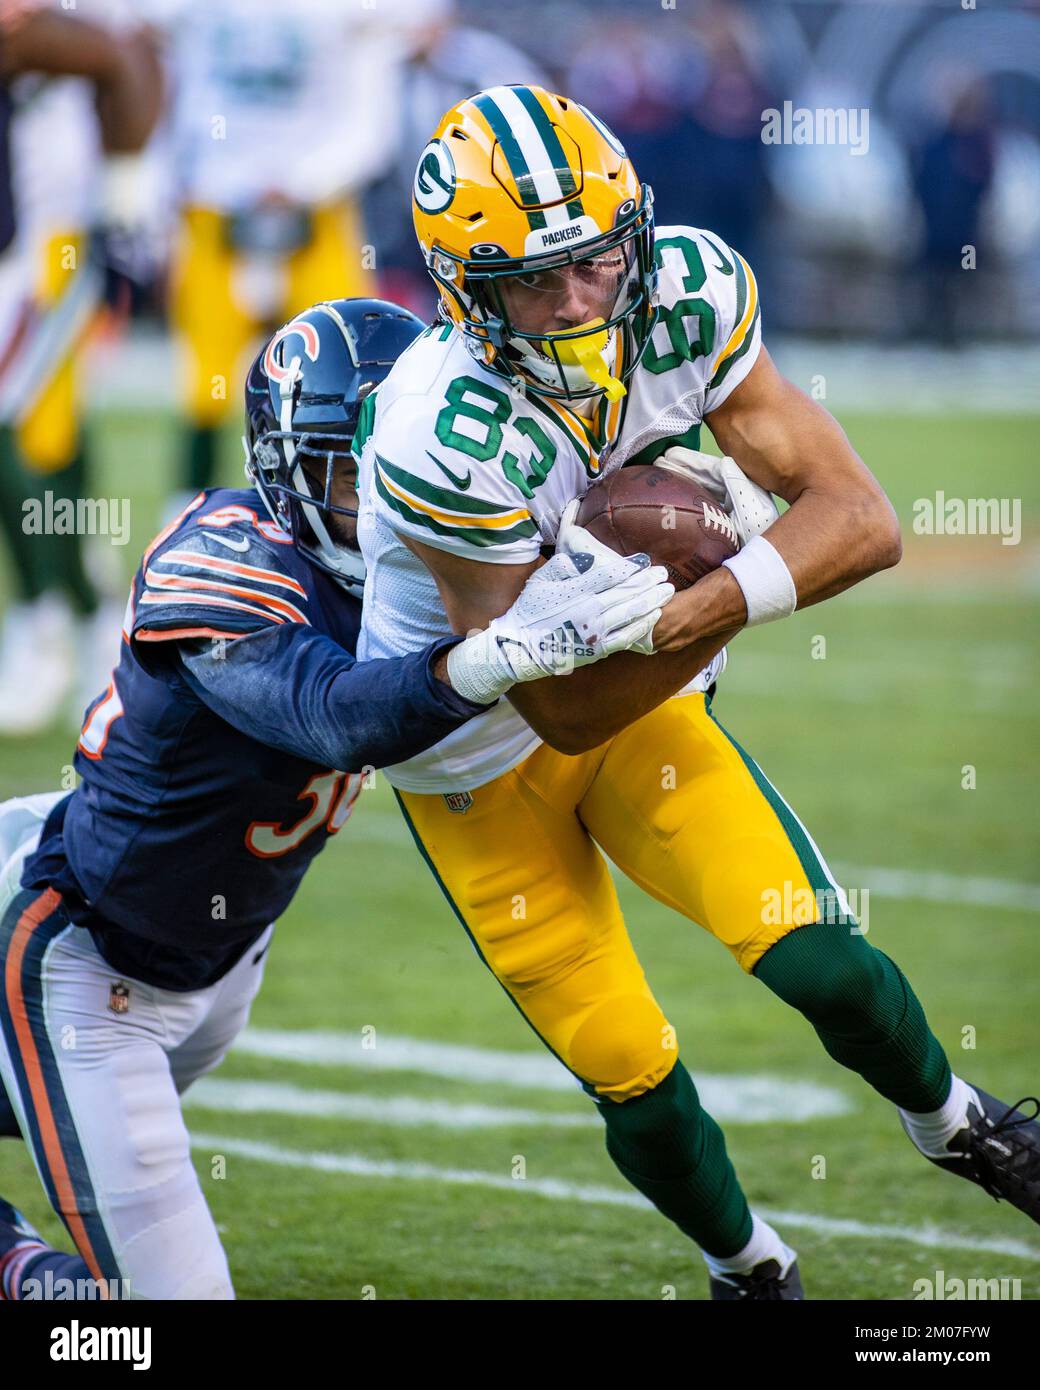 Chicago, IL, USA. 04th Dec, 2022. Chicago Bears #36 DeAndre Houston-Carson tackles Packers #23 Samori Toure during a game against the Green Bay Packers in Chicago, IL. Mike Wulf/CSM/Alamy Live News Stock Photo